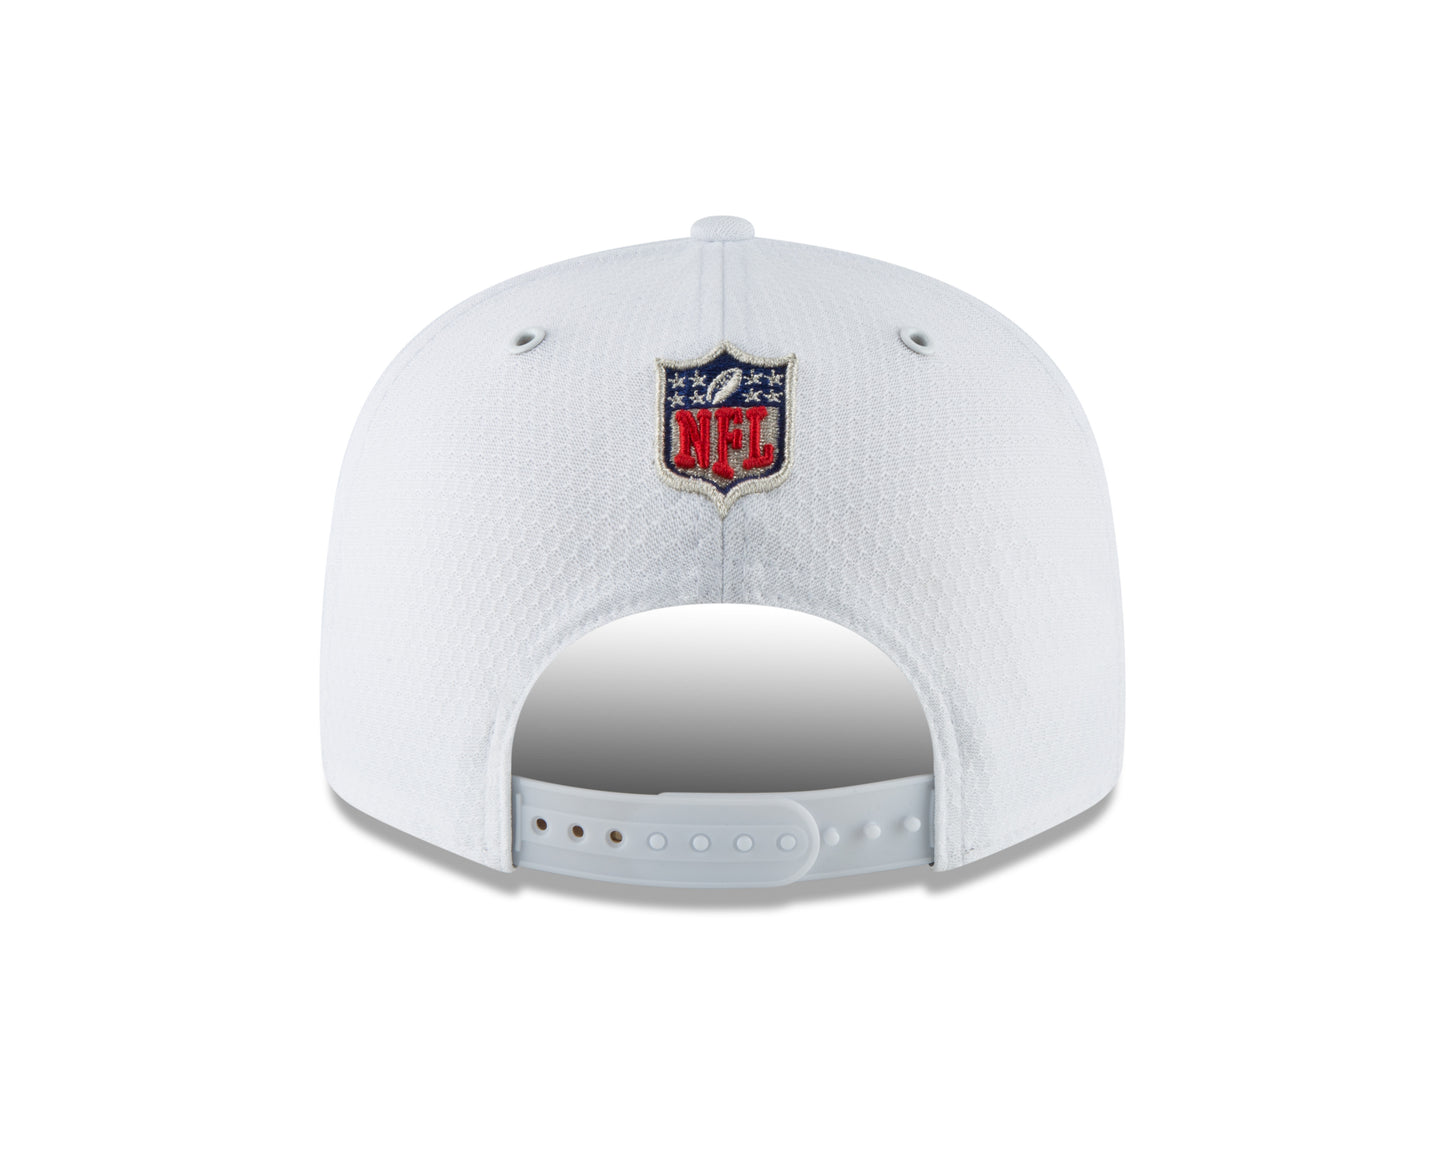 Green Bay Packers New Era Color Rush 9FIFTY Snapback Hat - White